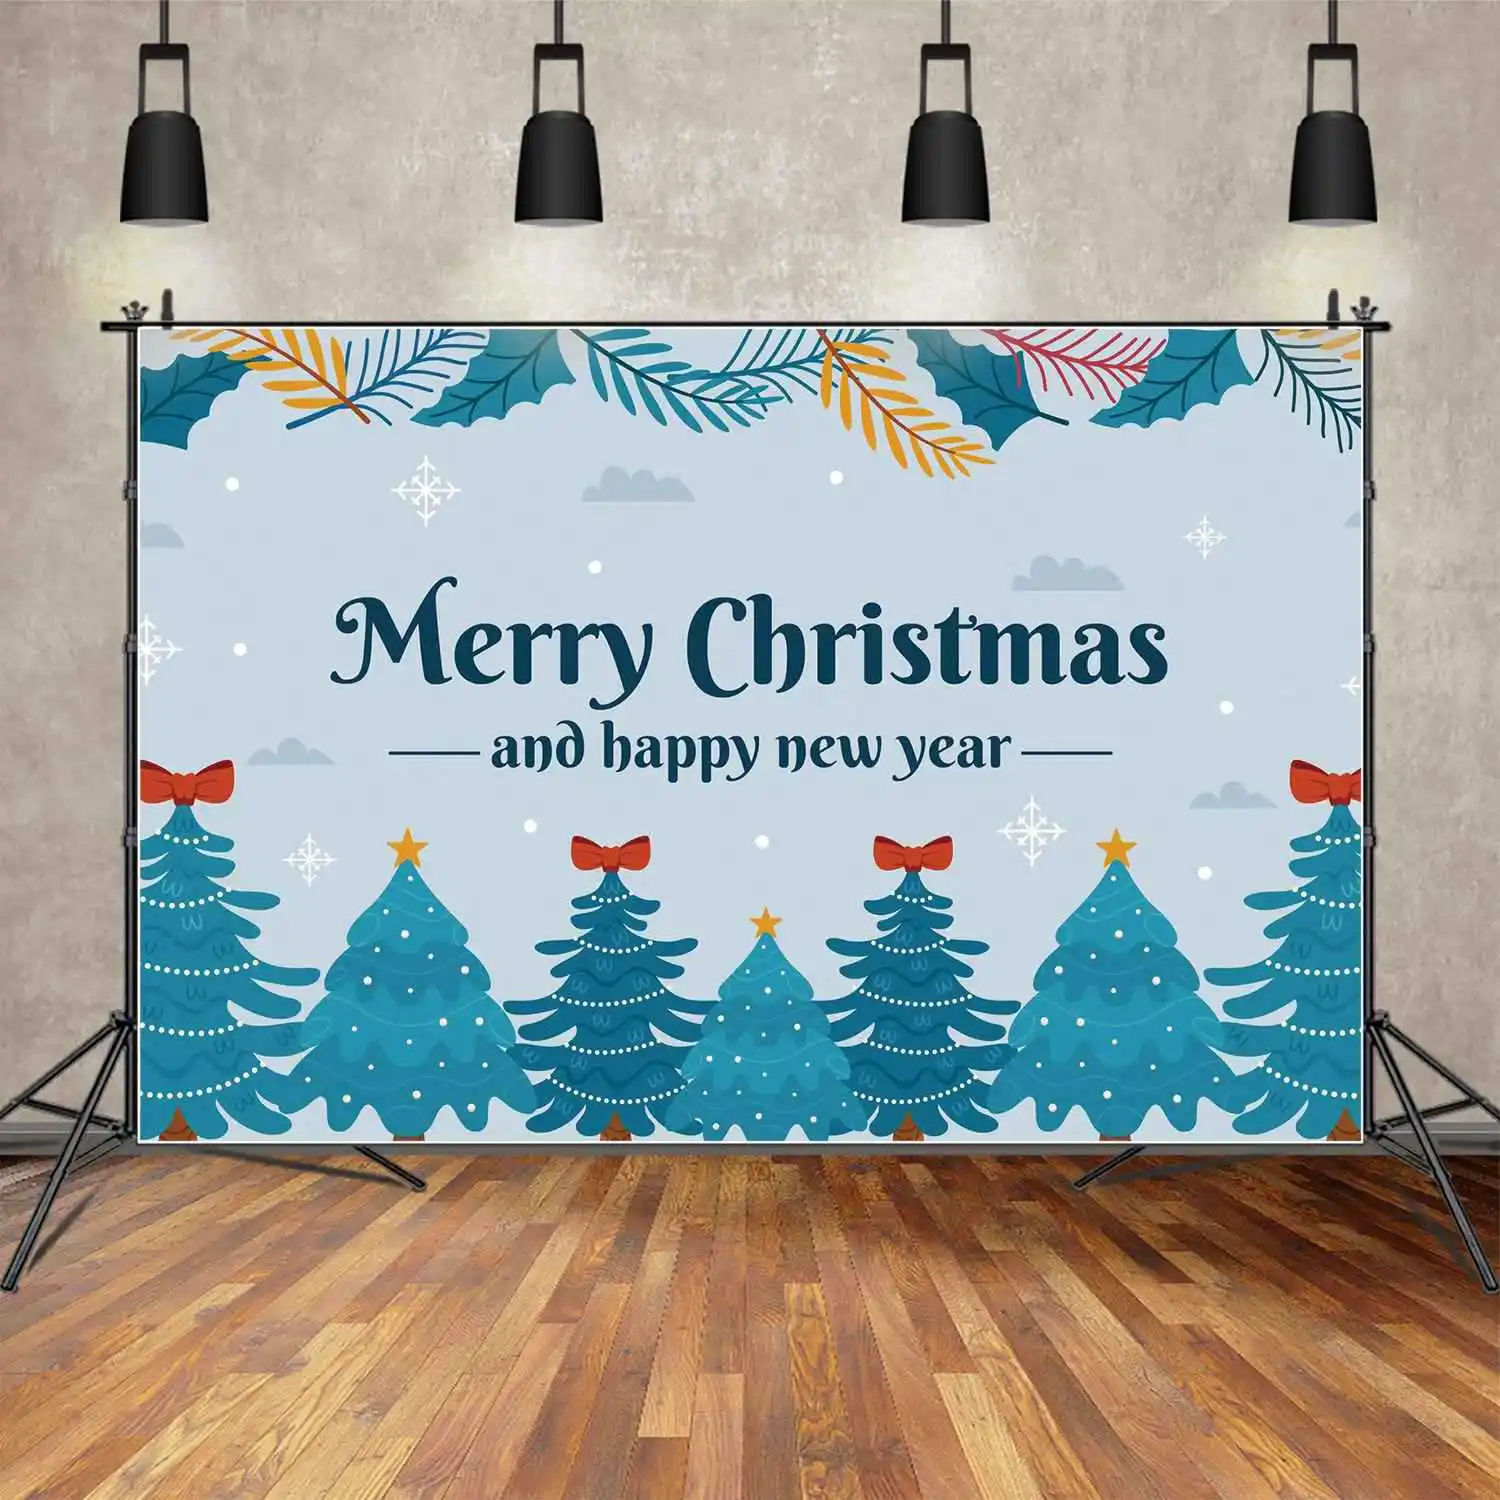 

MOON.QG Backdrop Merry Christmas Snow Tree Banner Kids Party Decoration Background Bowknot Pine Snowflake Sky Photo Booth Props